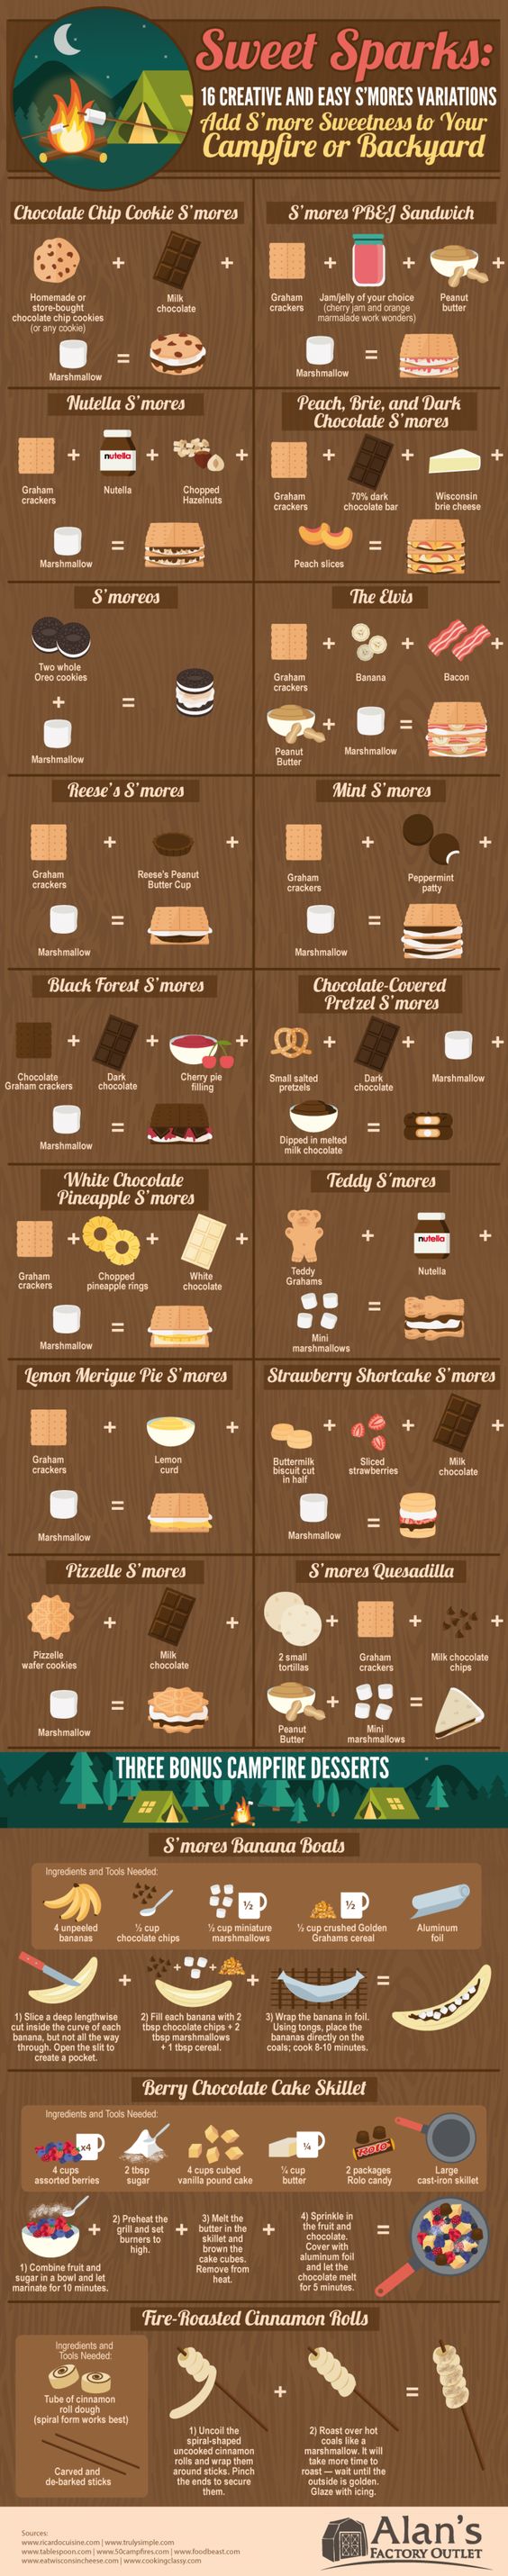 6 Creative and Easy S'mores Variations Infographic